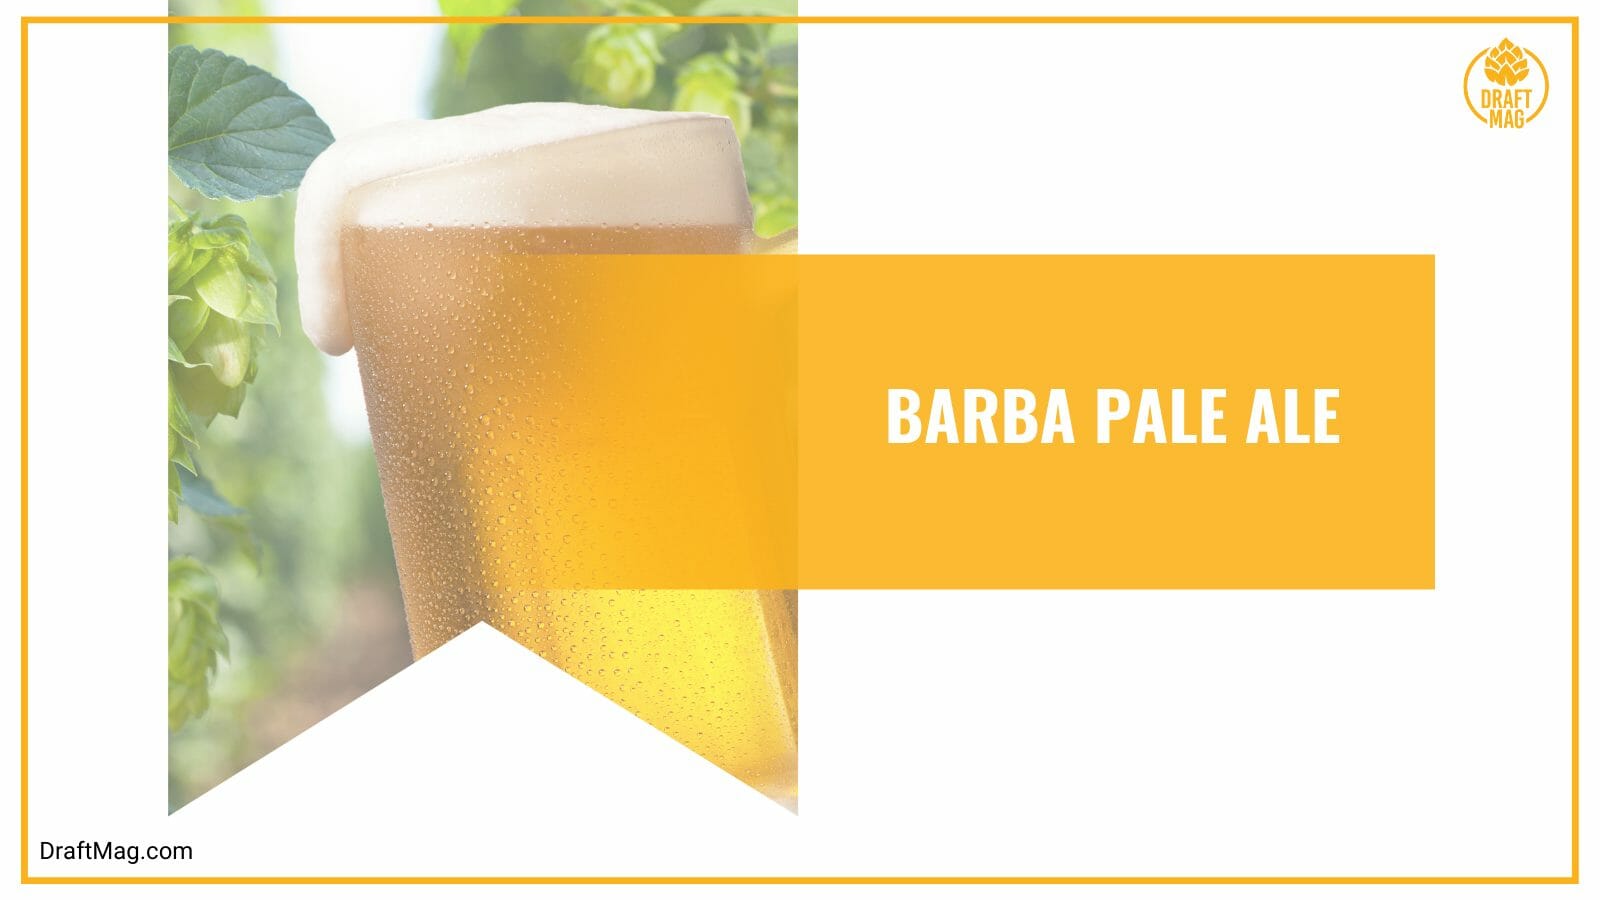 Barba pale ale with pines